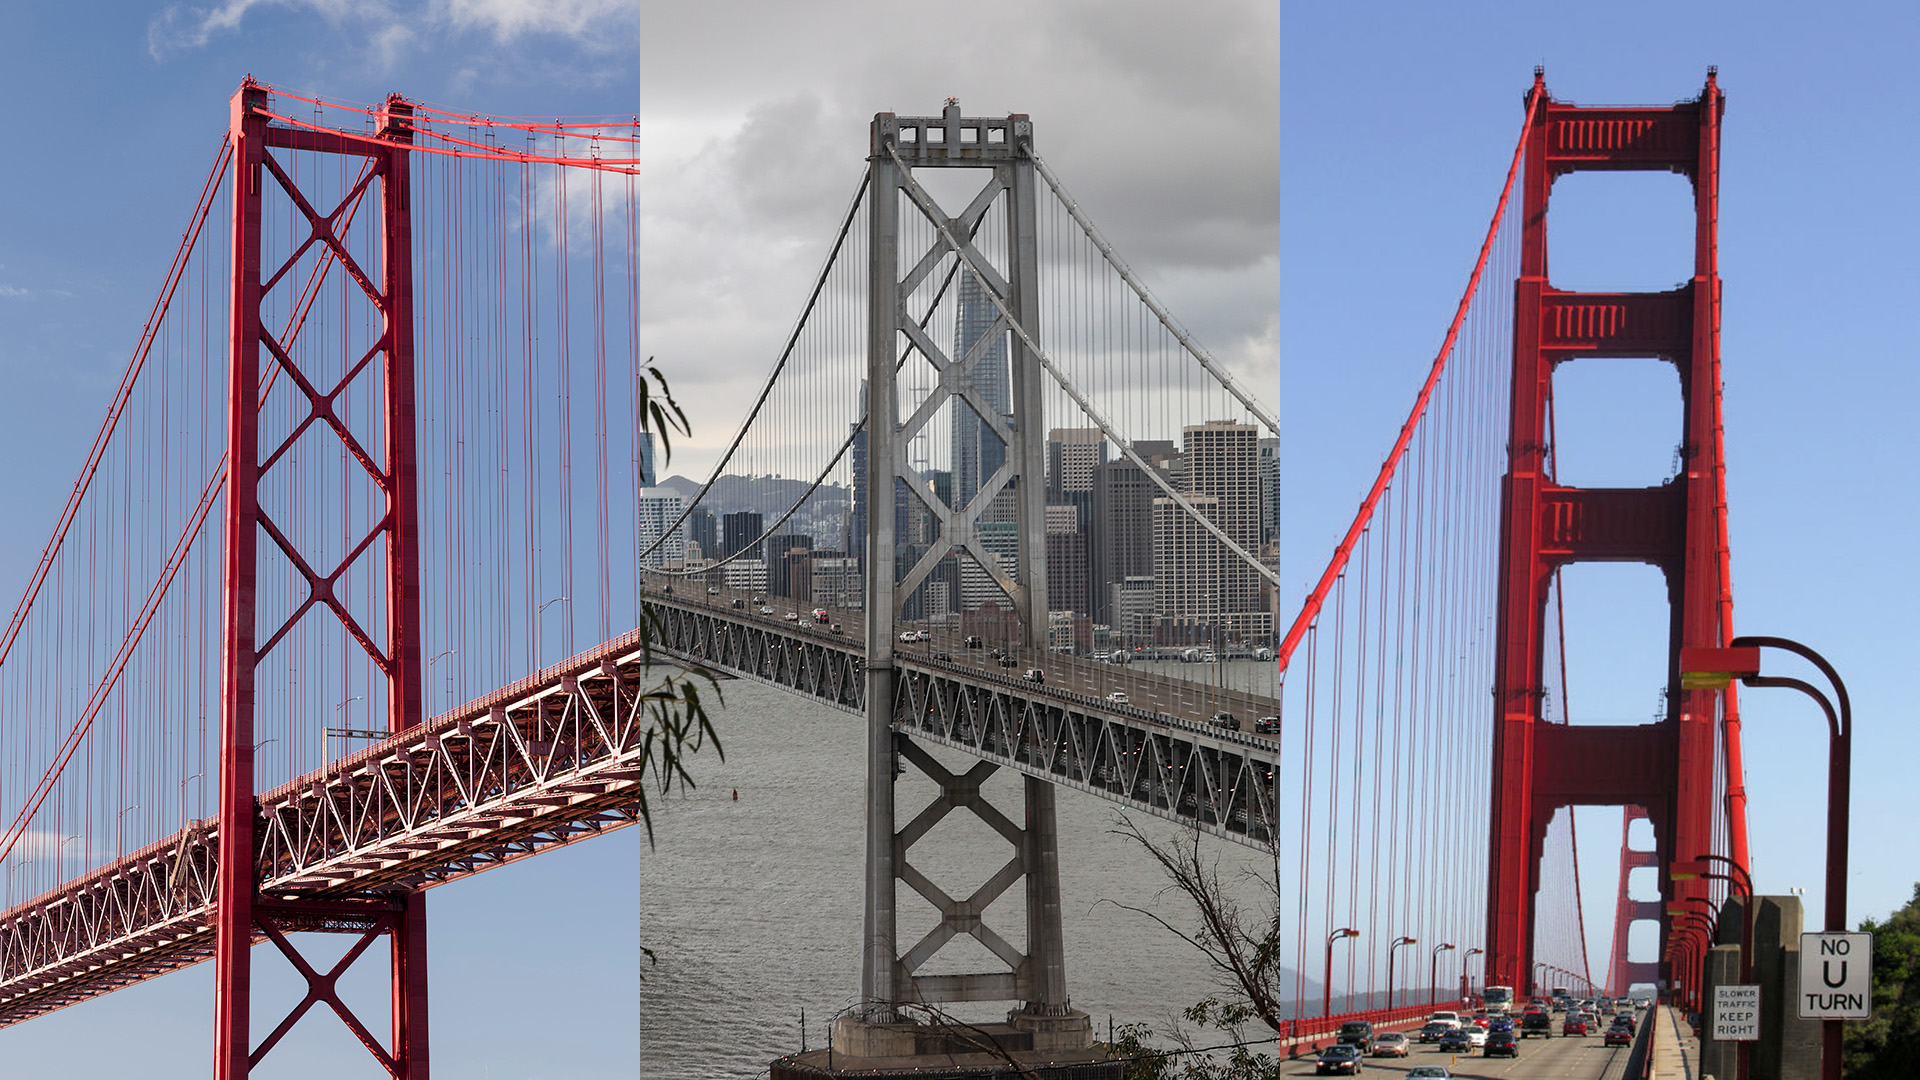 What's With the Golden Gate Bridge Look-Alike in Lisbon?